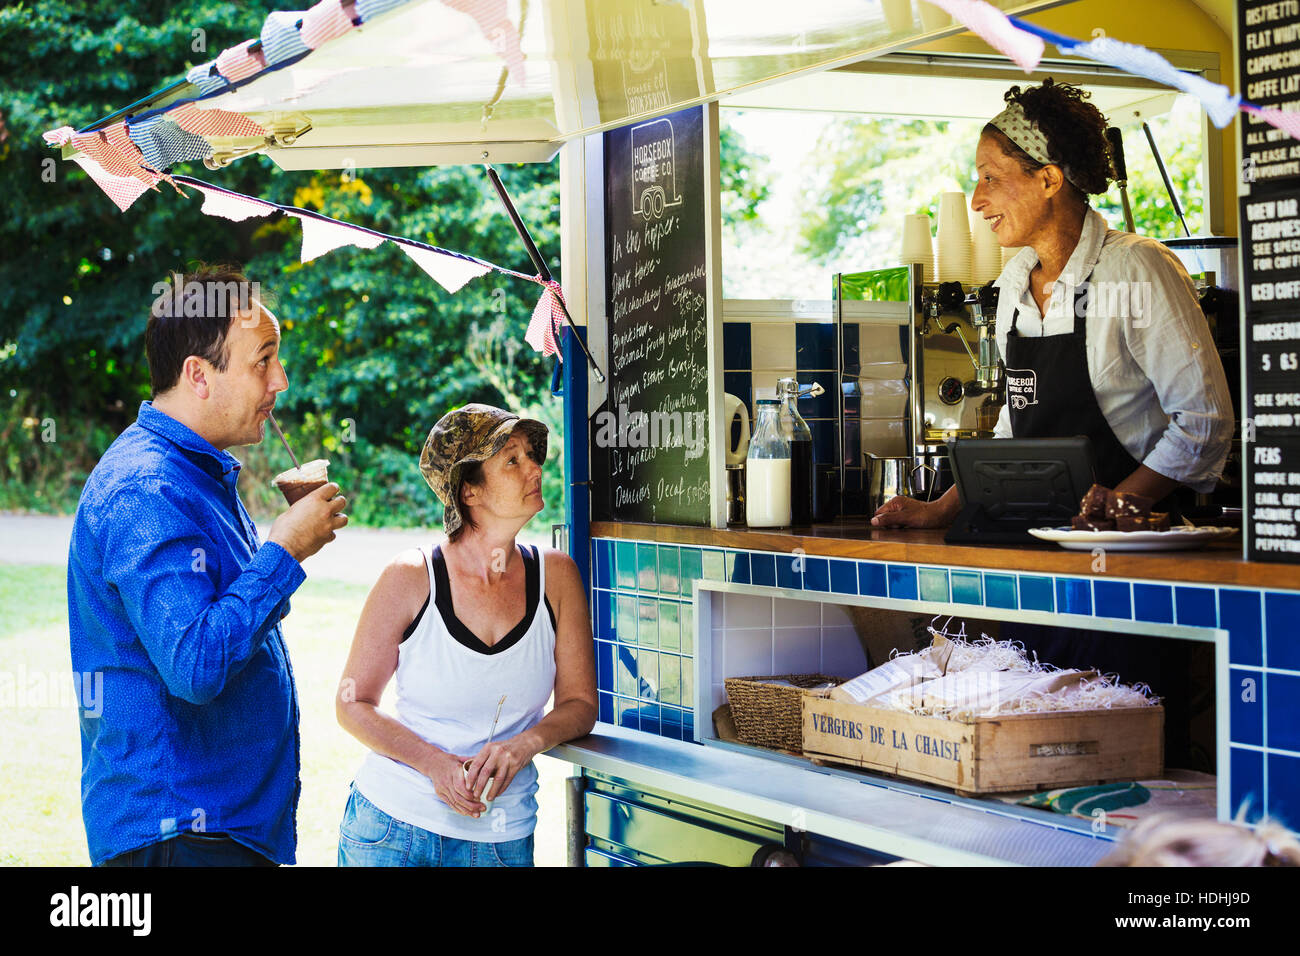 Man and woman standing at the counter of a mobile coffee shop. Stock Photo